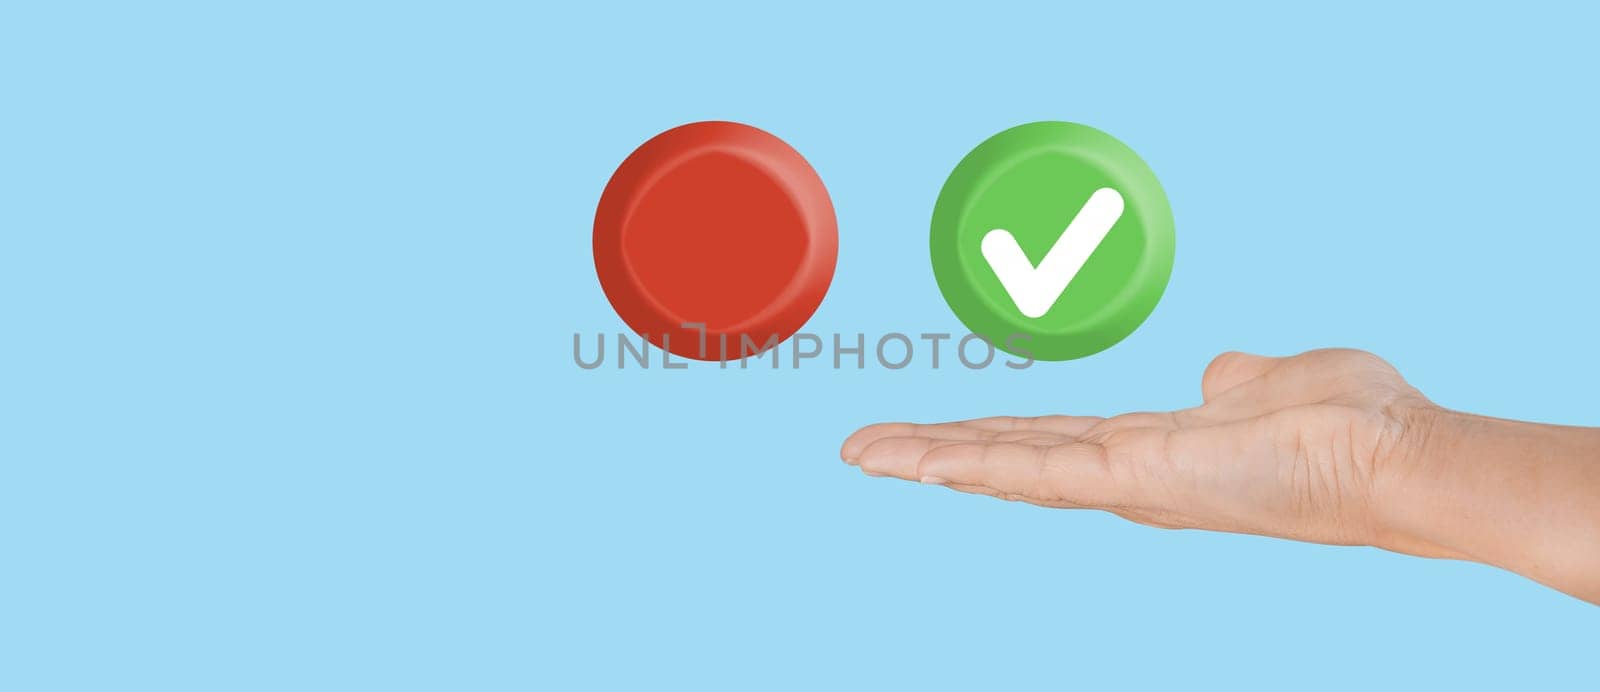 Hand hold green right sign icon and empty red icon on blue background. Choice concept.